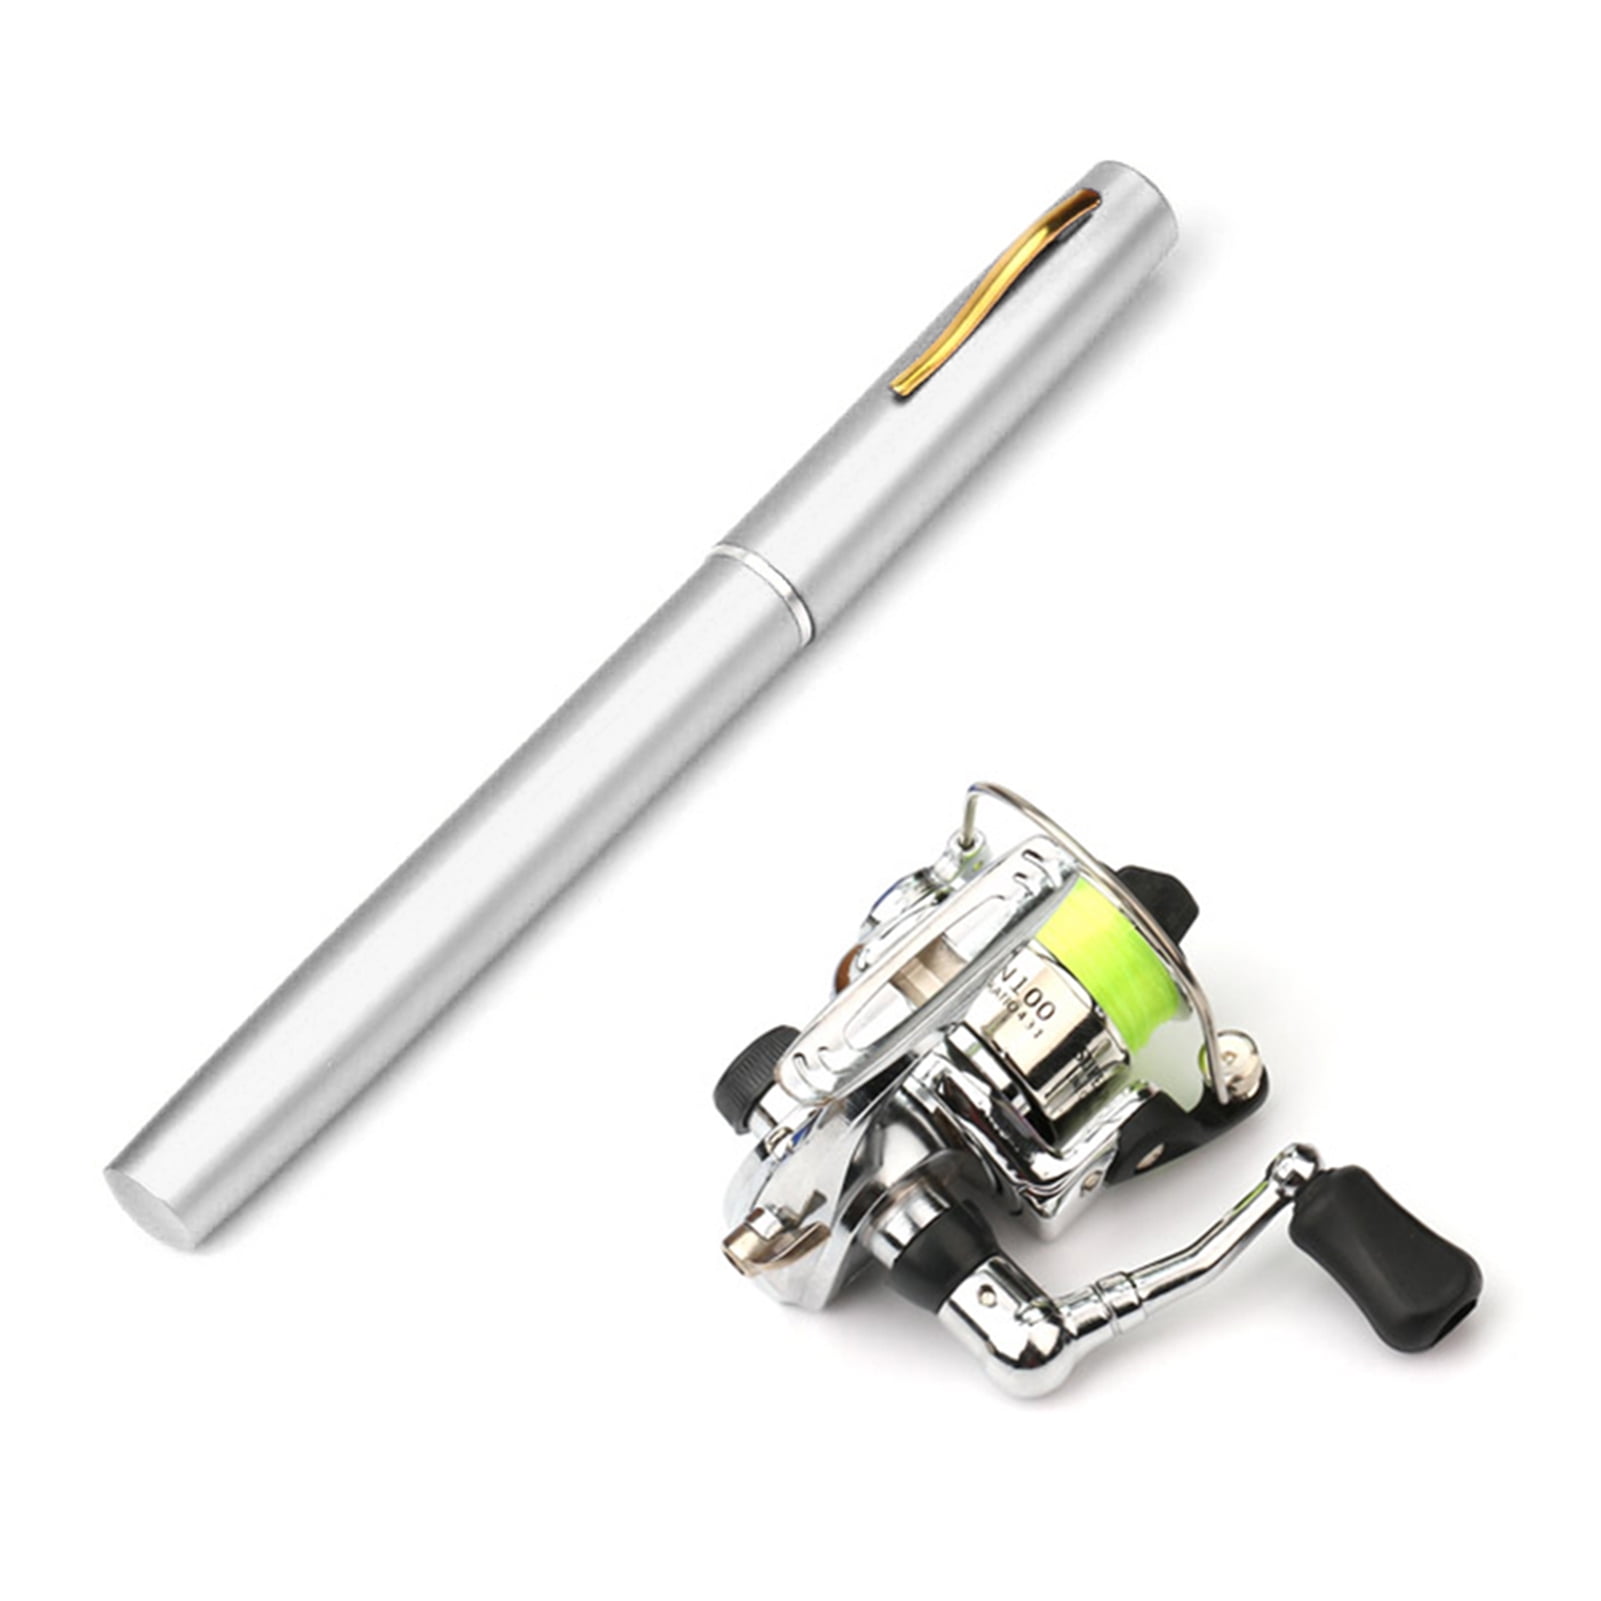 Hot Sale: Pen Pocket Fishing Pole Set With Pole And Reel Combo Ideal For  Outdoor Tackle Tool Enthusiasts From Moveupstore, $22.22